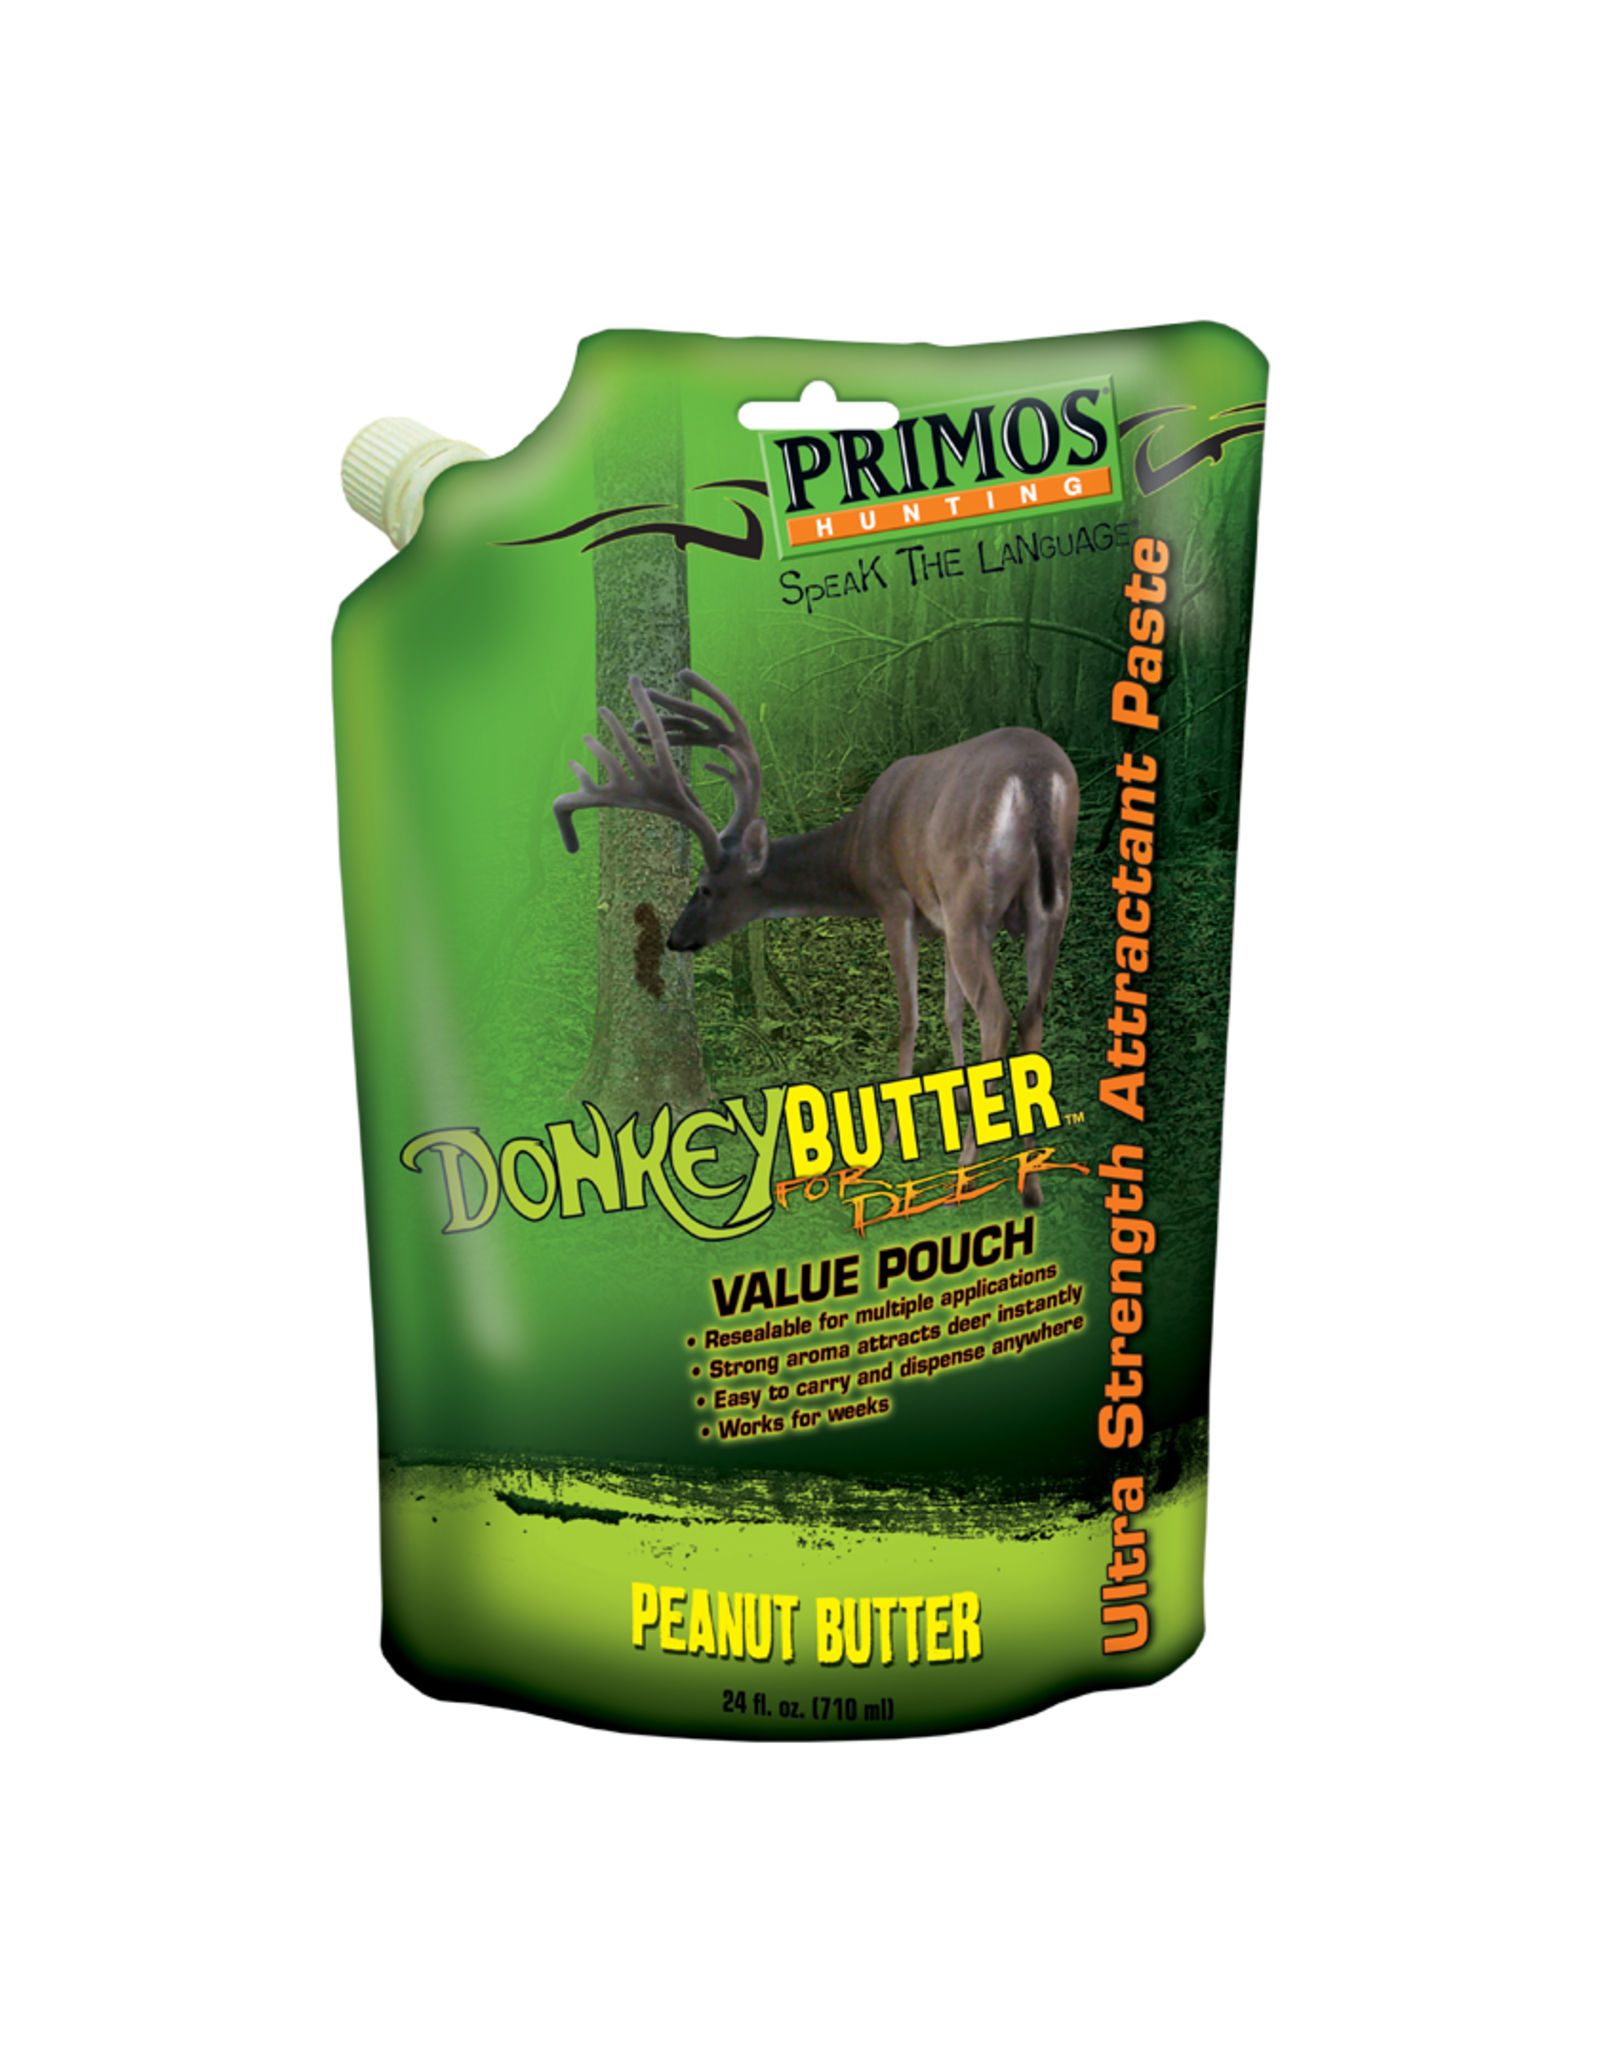 PRIMOS Donkey Butter Peanut Butter Flavored